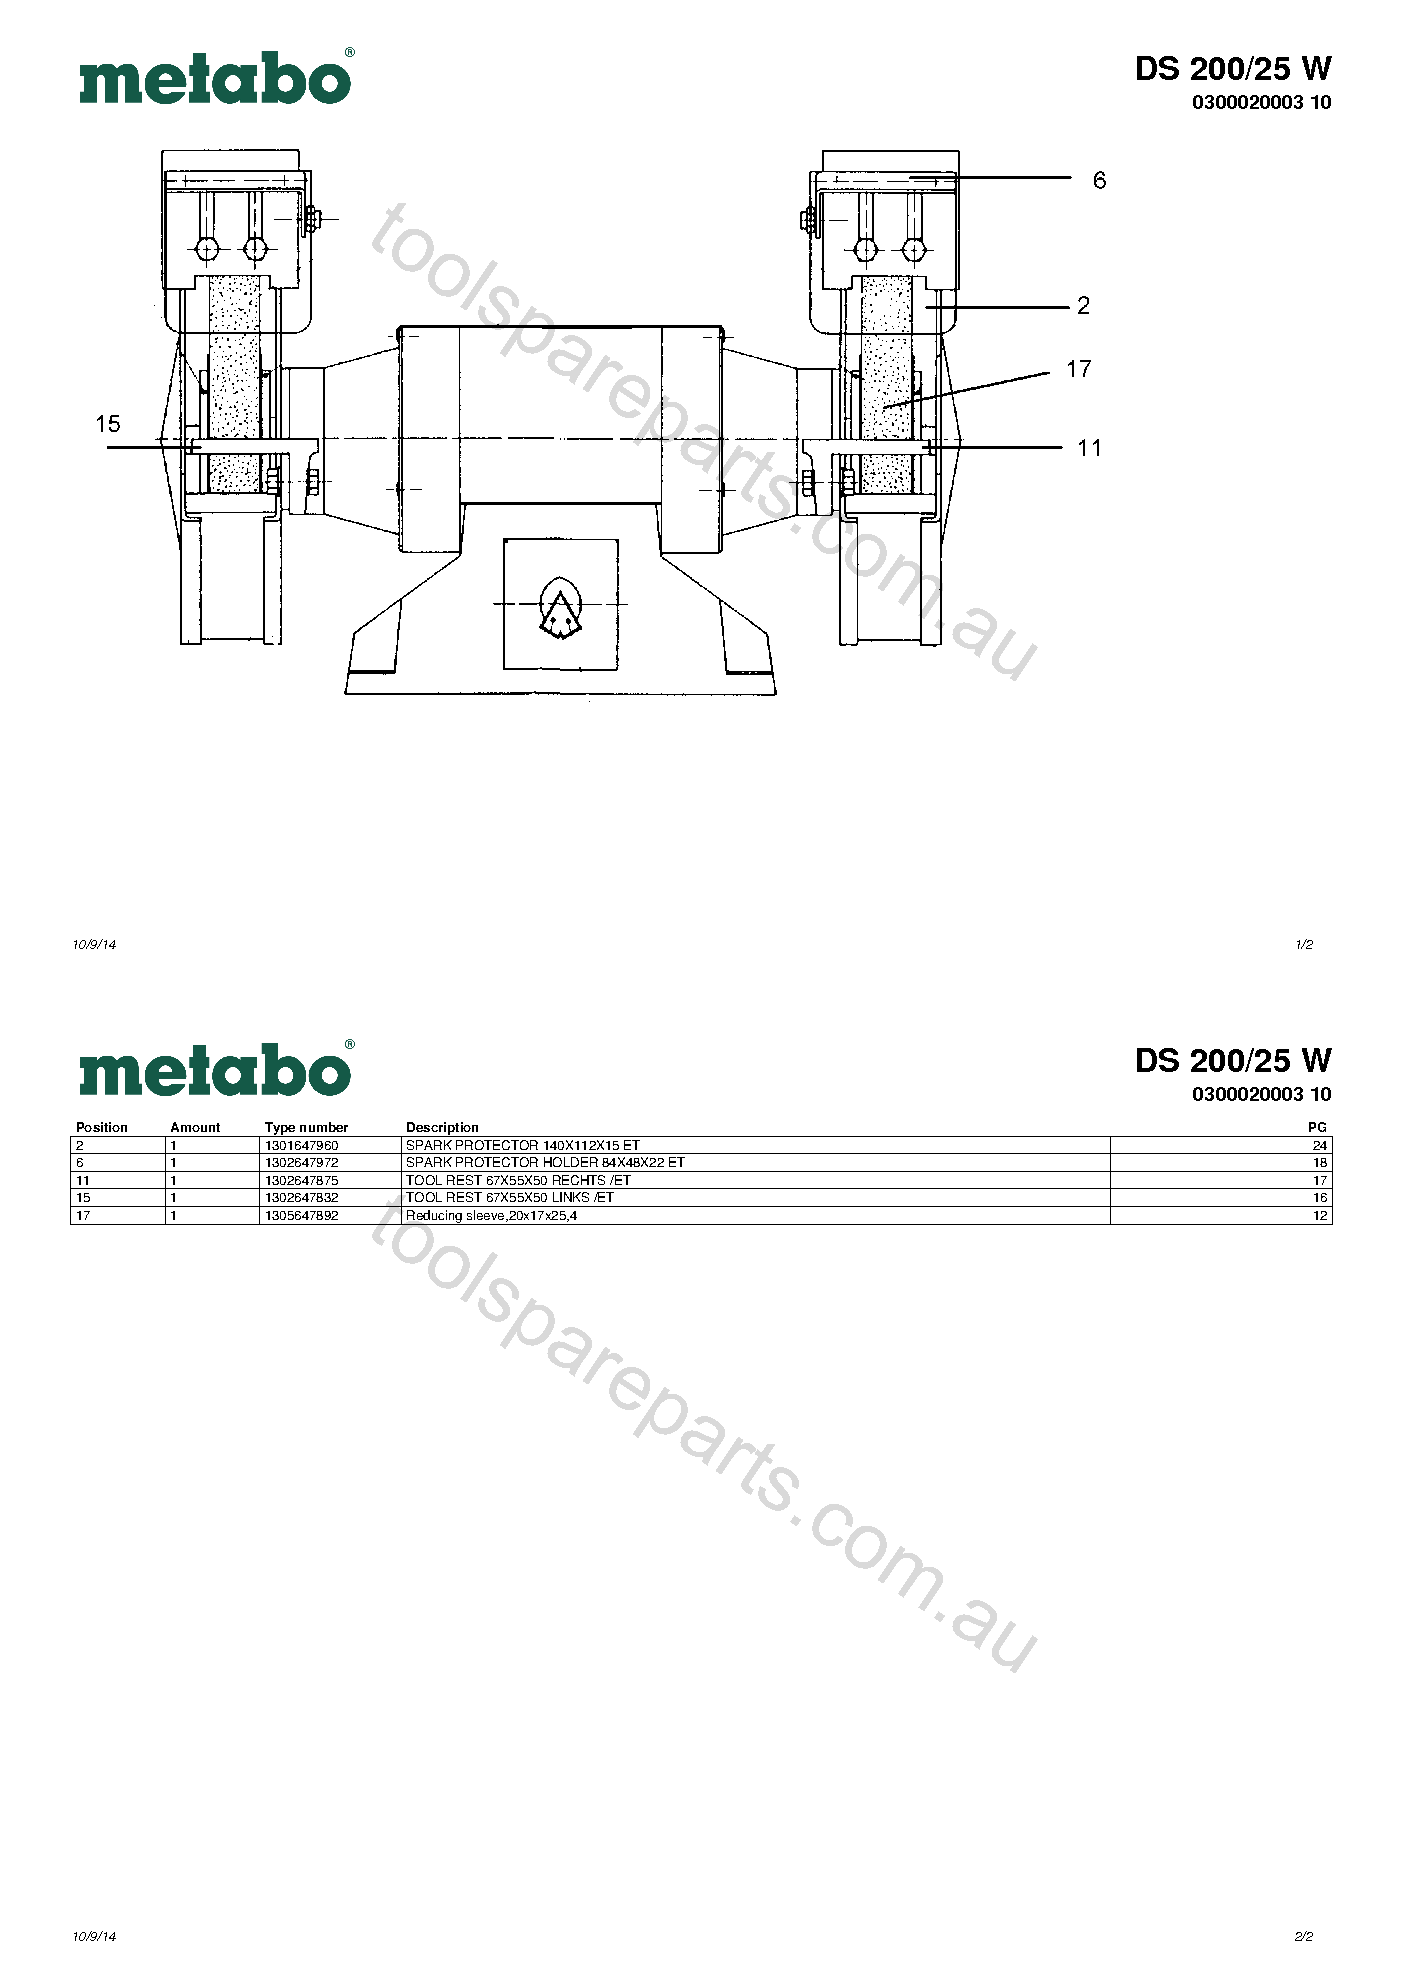 Metabo DS 200/25 W 0300020003 10  Diagram 1